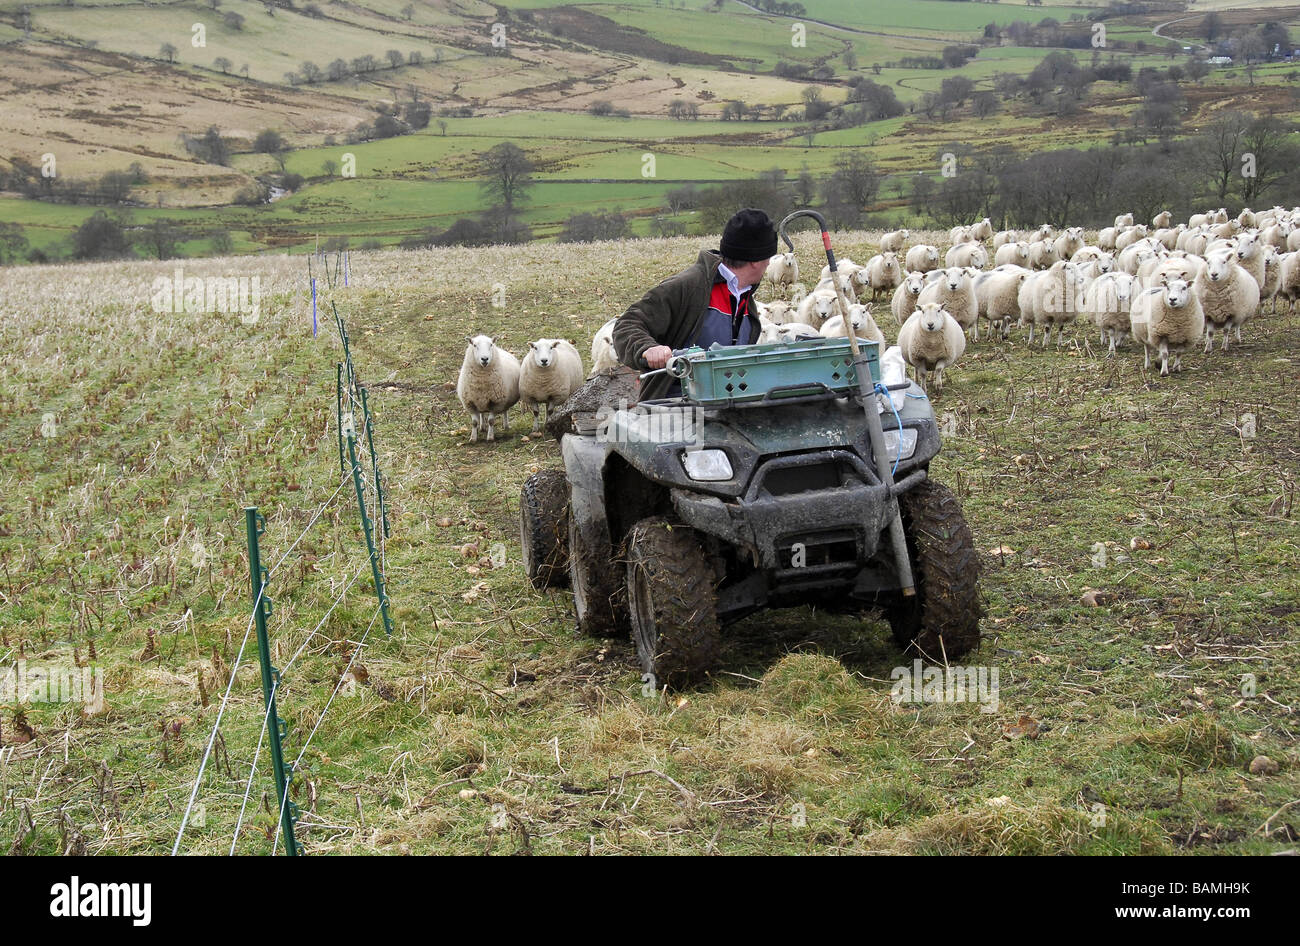 Farmer shepherding a flock of sheep across a bisected grazing field from a quad bike on a hill farm Stock Photo